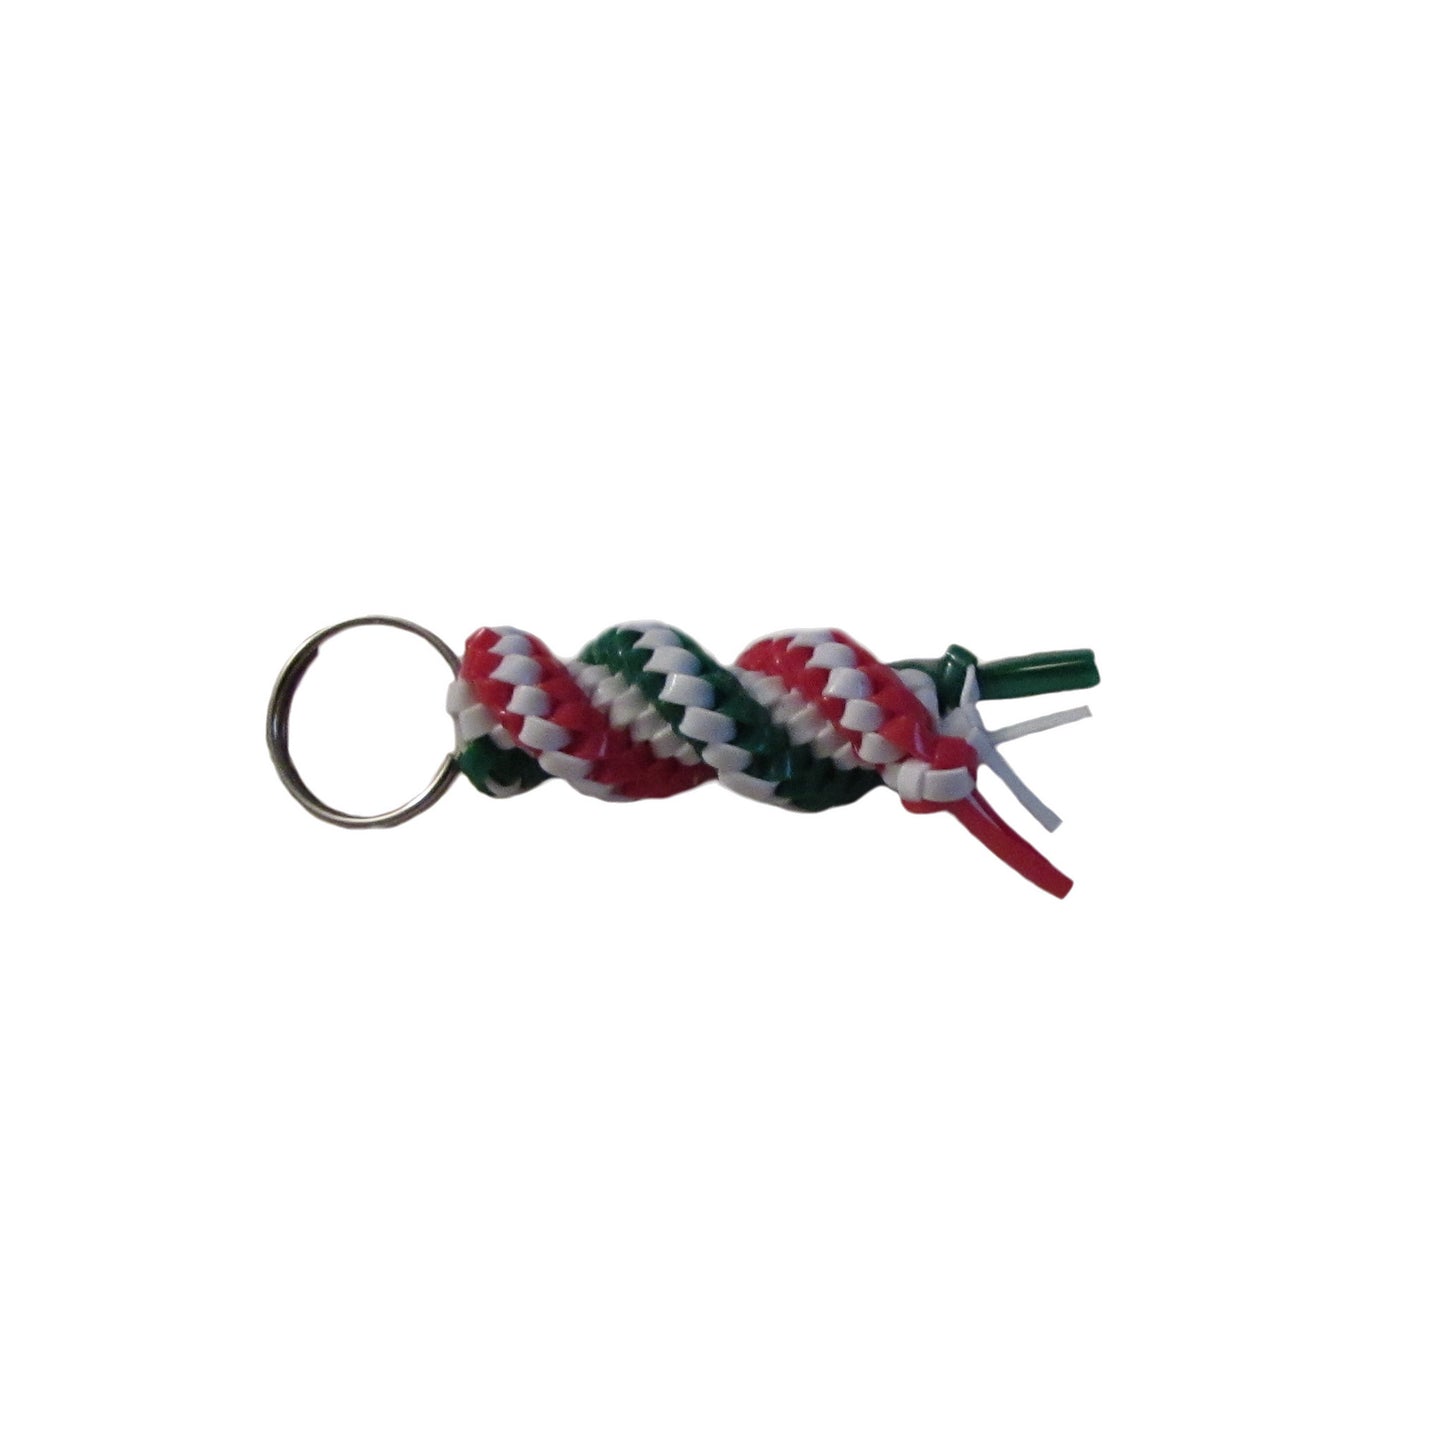 Red, Green, and White Plastic Lacing Key Chain Left view